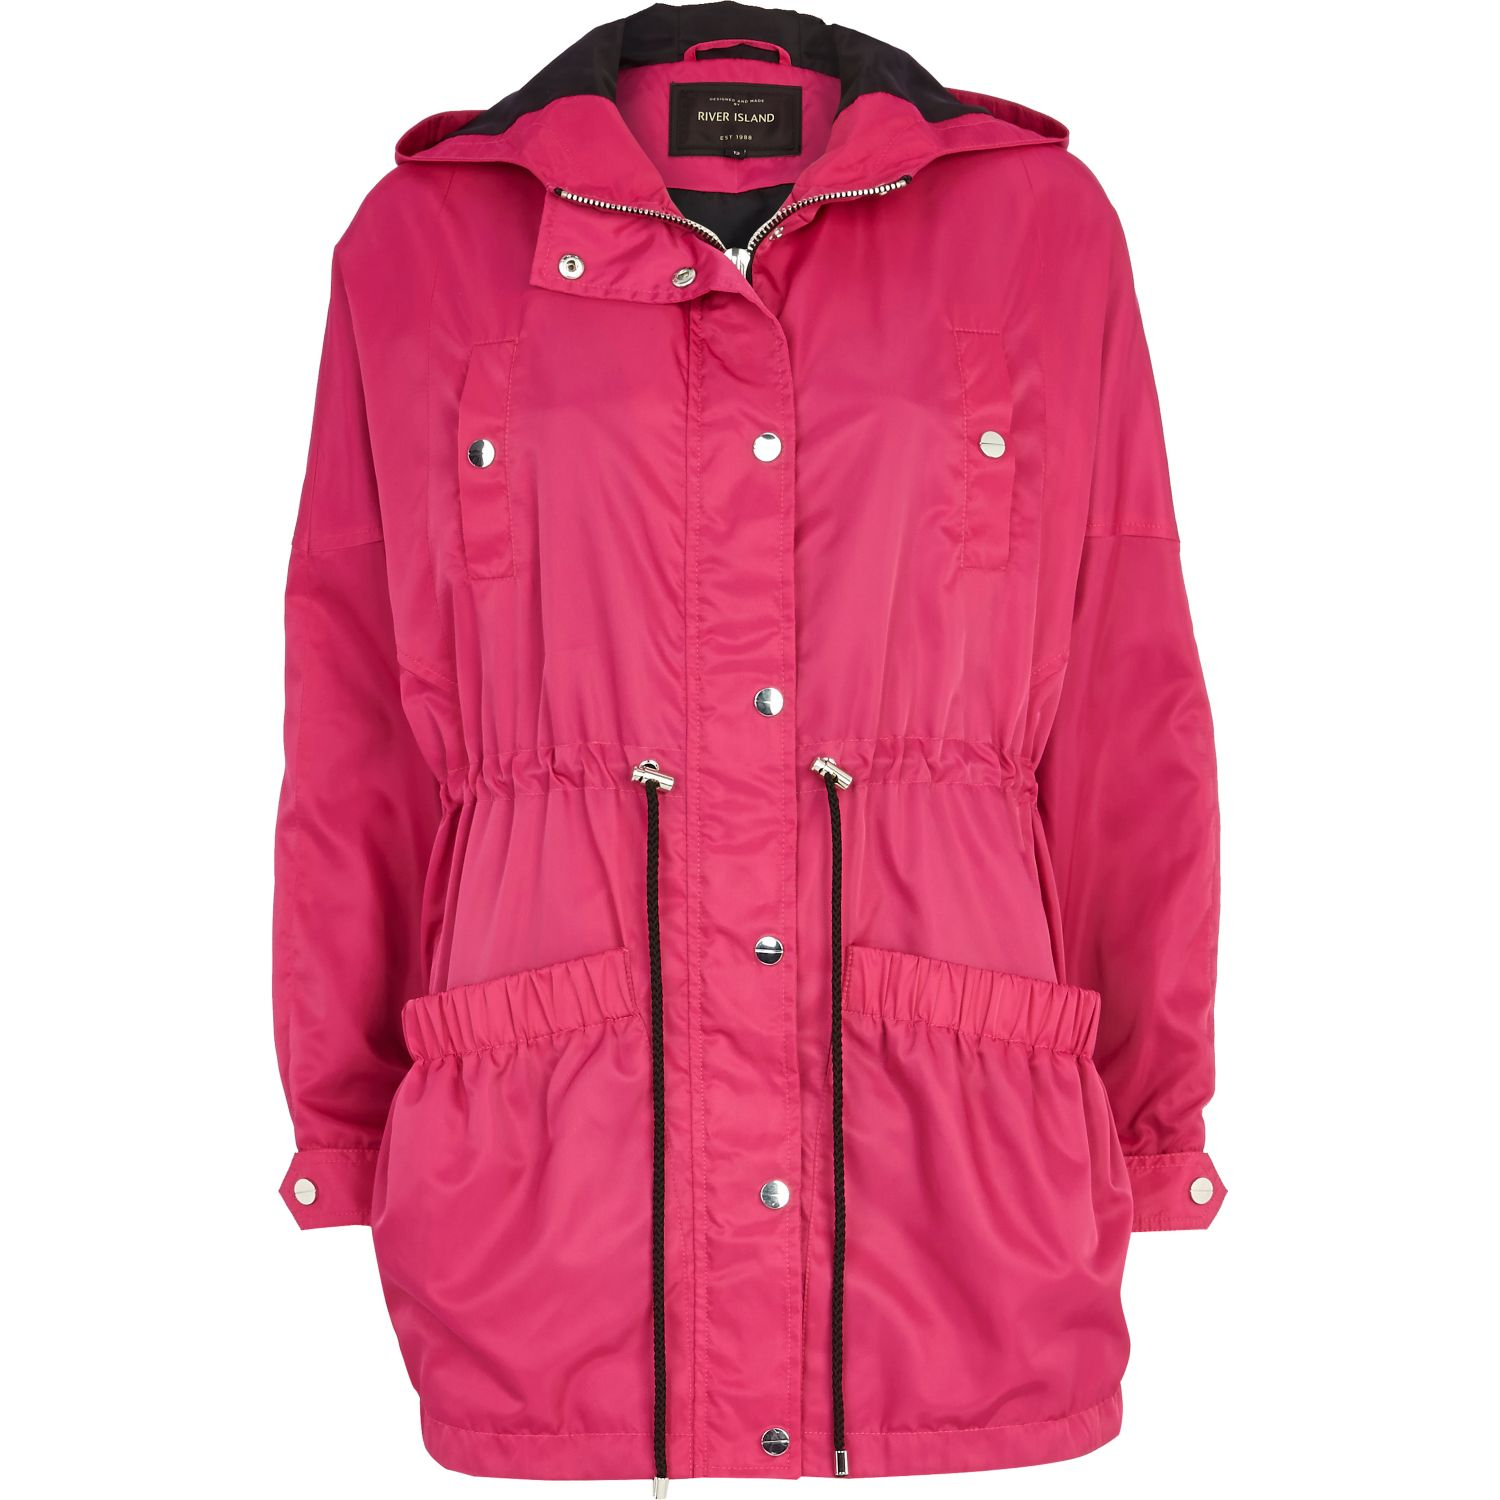 River Island Bright Pink Anorak Jacket in Pink | Lyst